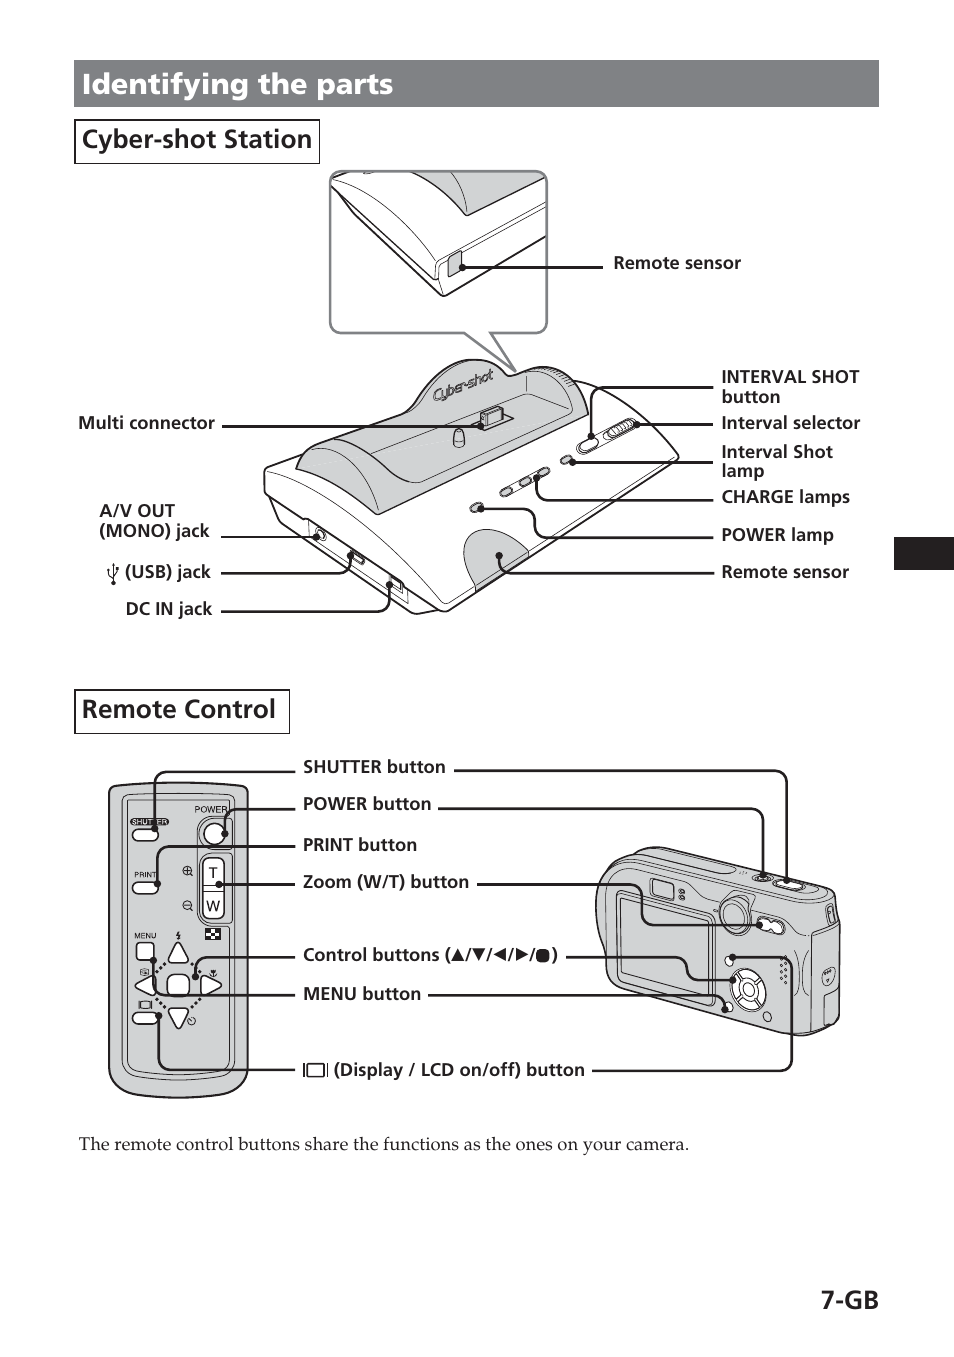 Identifying the parts, Cyber-shot station remote control | Sony Cyber-Shot Station CSS-PHB Manuel d'utilisation | Page 7 / 32